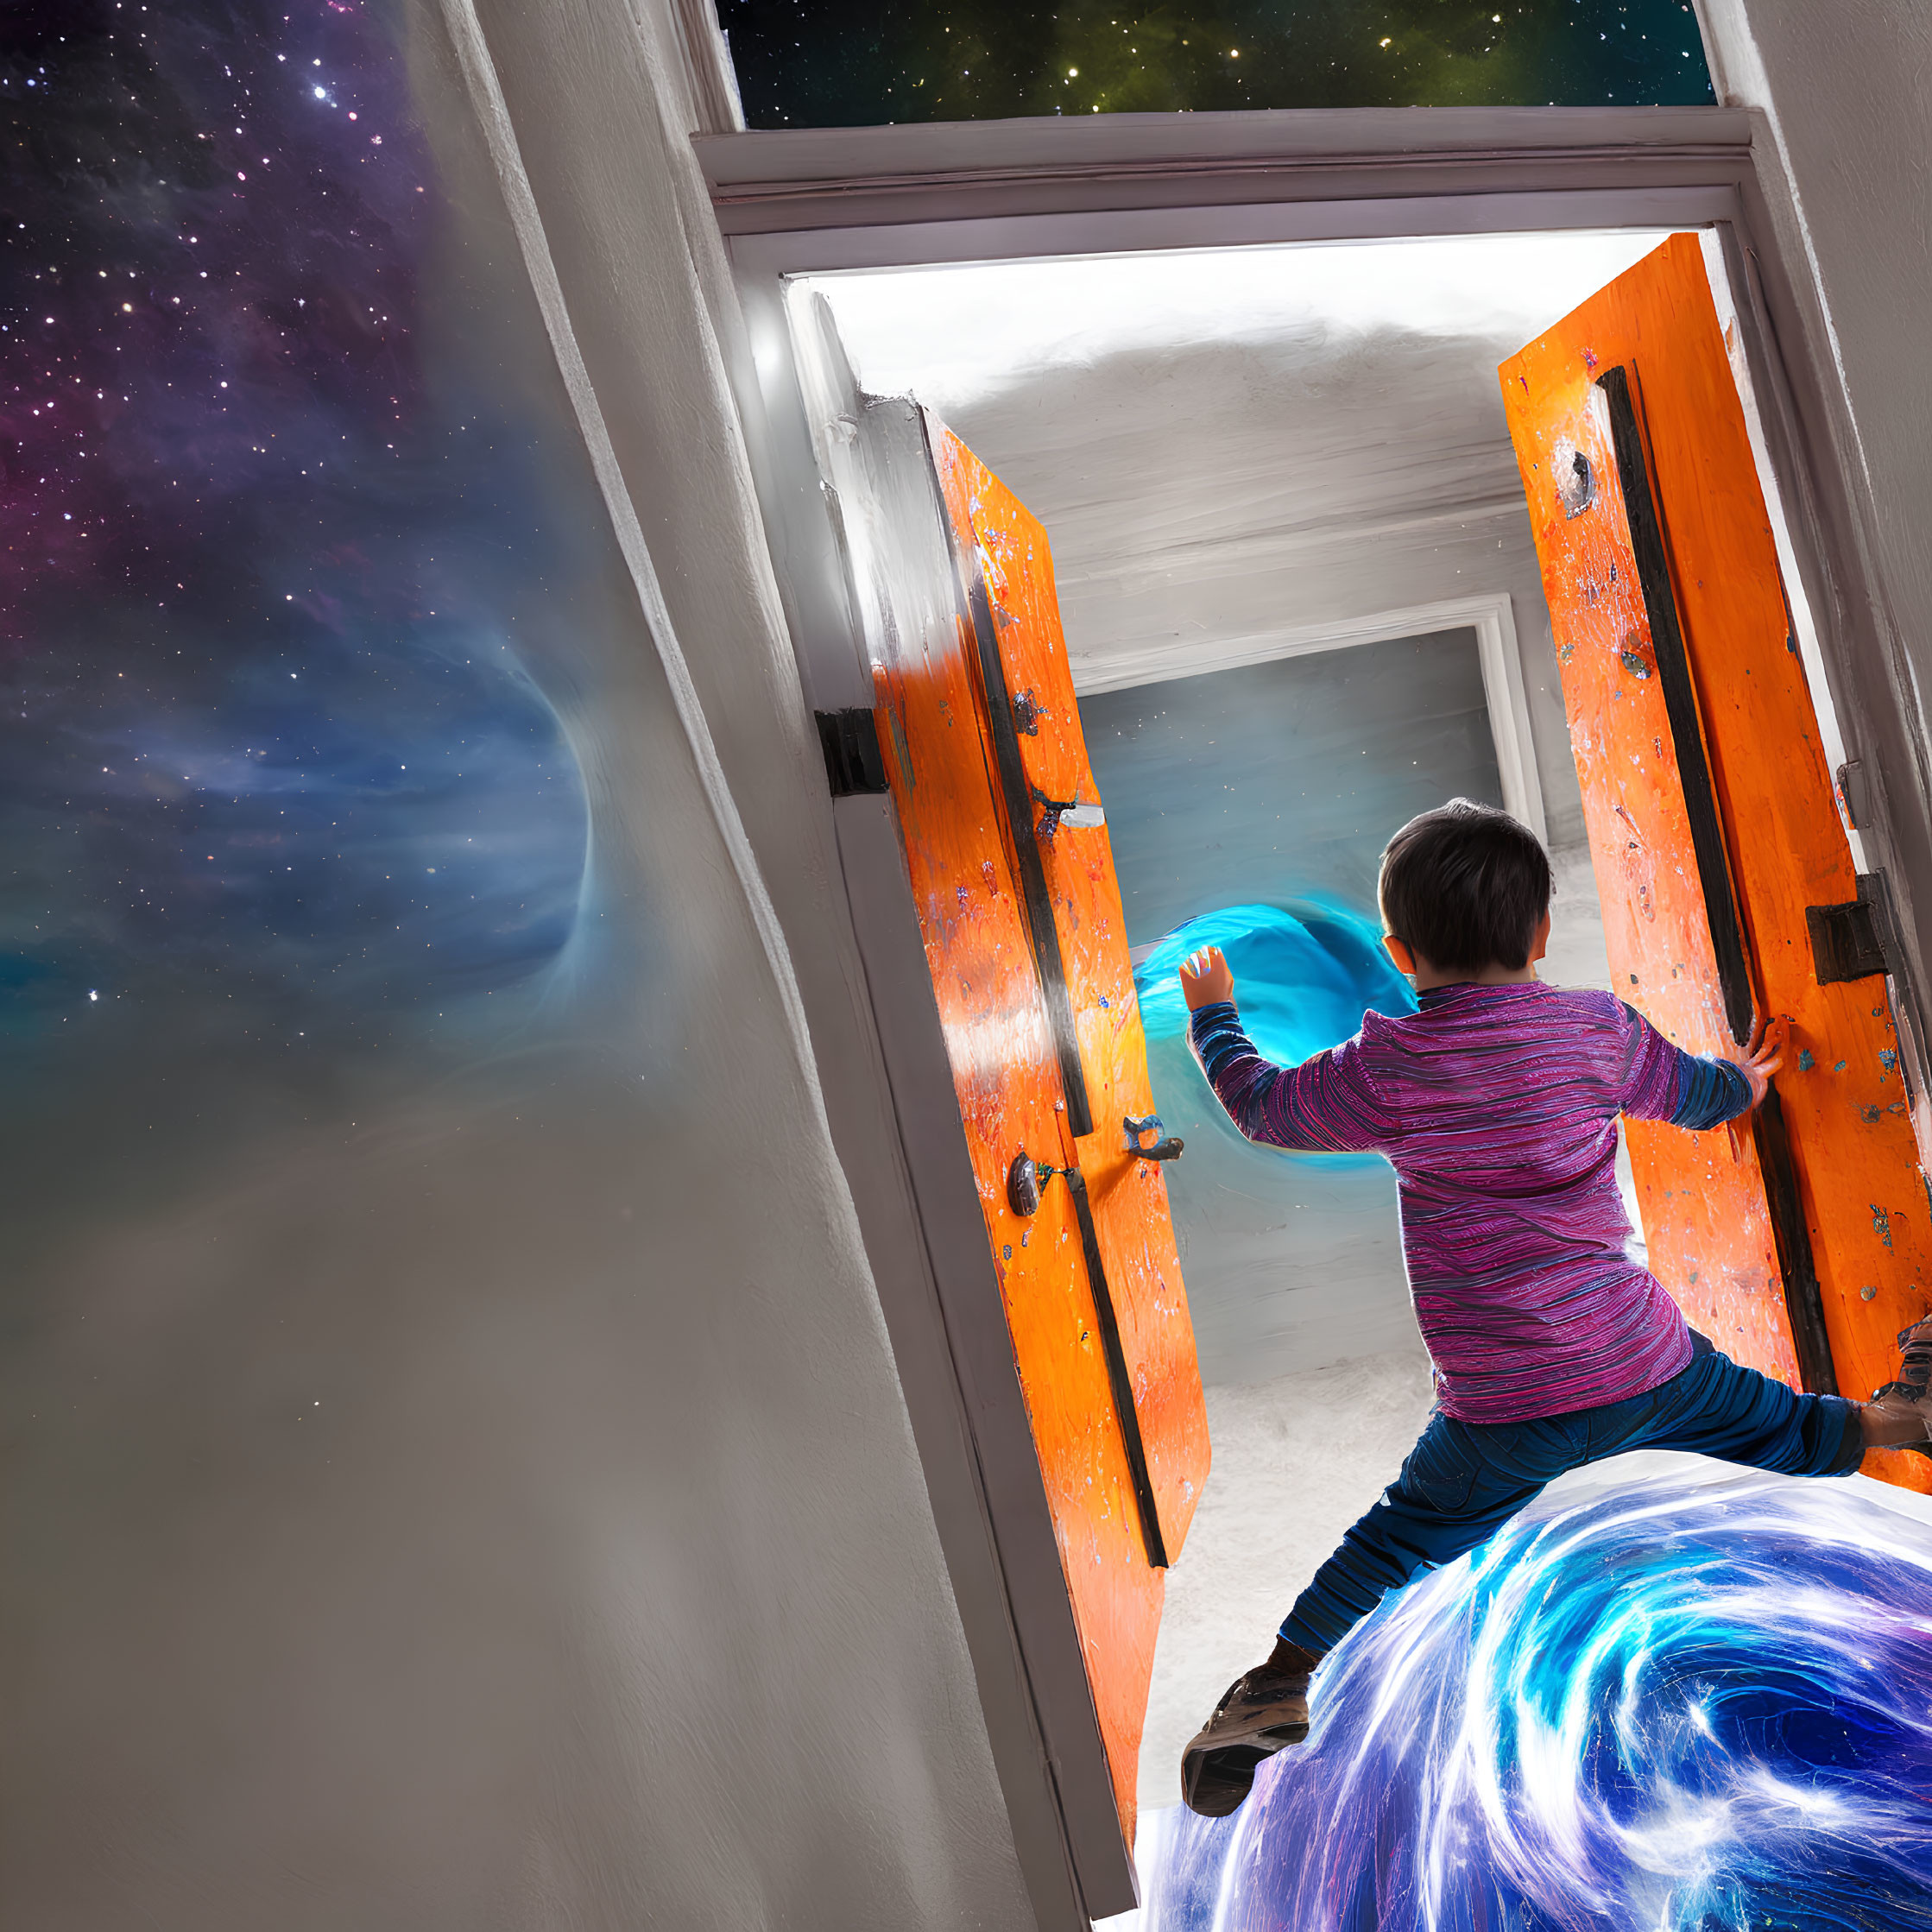 Child Enters Cosmic Space with Galaxies and Stars